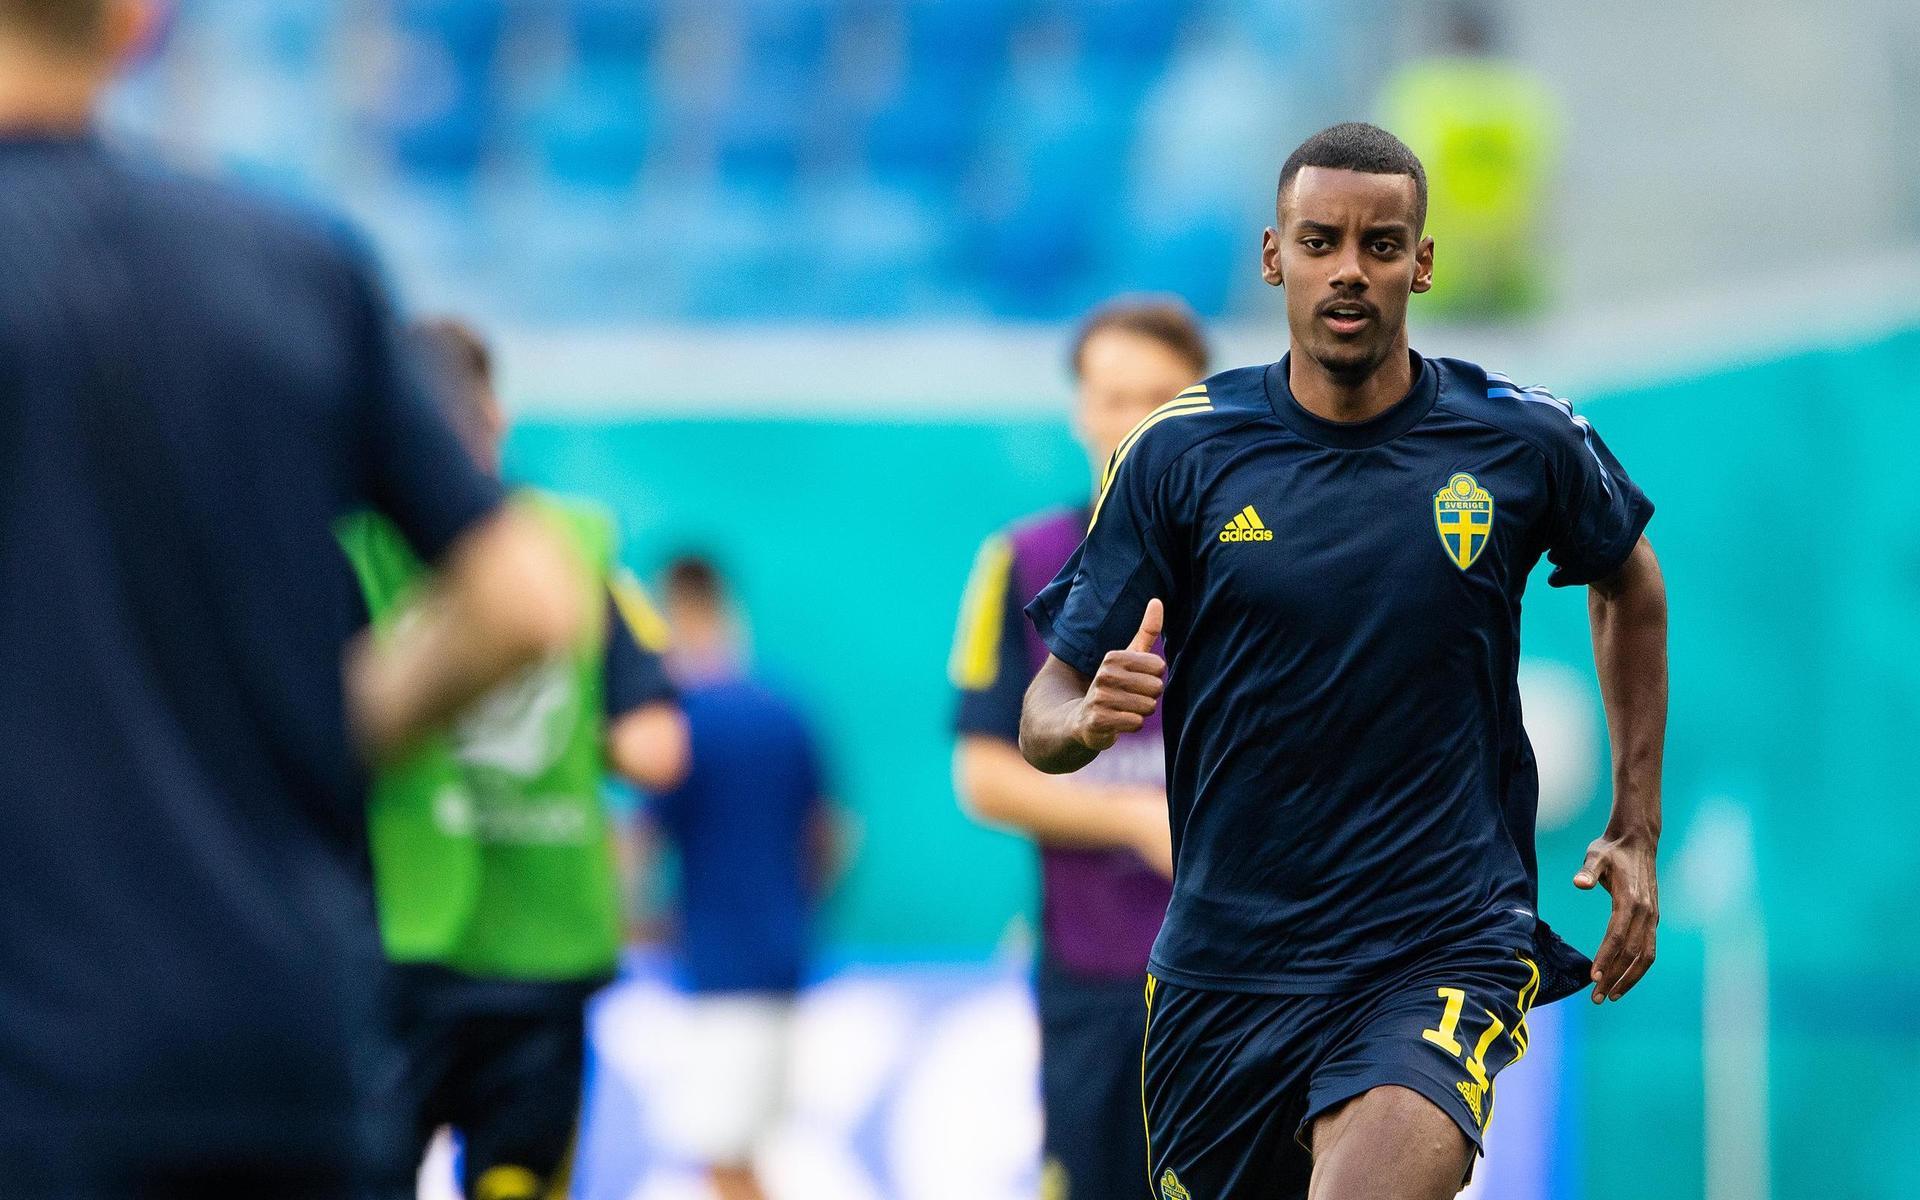 Alexander Isak of Sweden during warm up ahead of the UEFA Euro 2020 Football Championship match between Sweden and Slovakia on June 18, 2021 in Saint Petersburg. 